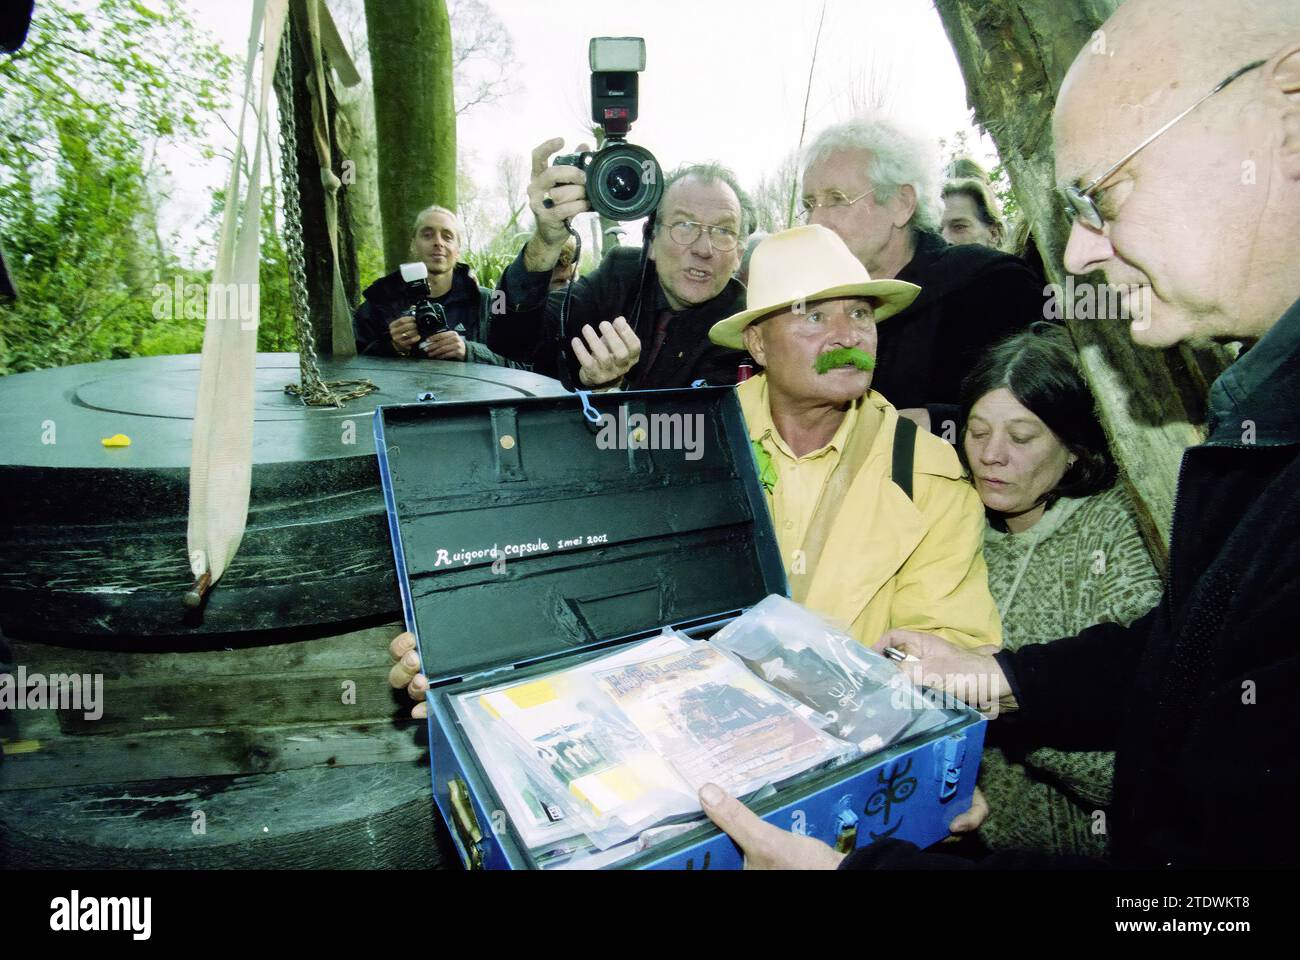 Ruigoord, time capsule, 30-04-2001, Whizgle News from the Past, Tailored for the Future. Explore historical narratives, Dutch The Netherlands agency image with a modern perspective, bridging the gap between yesterday's events and tomorrow's insights. A timeless journey shaping the stories that shape our future Stock Photo